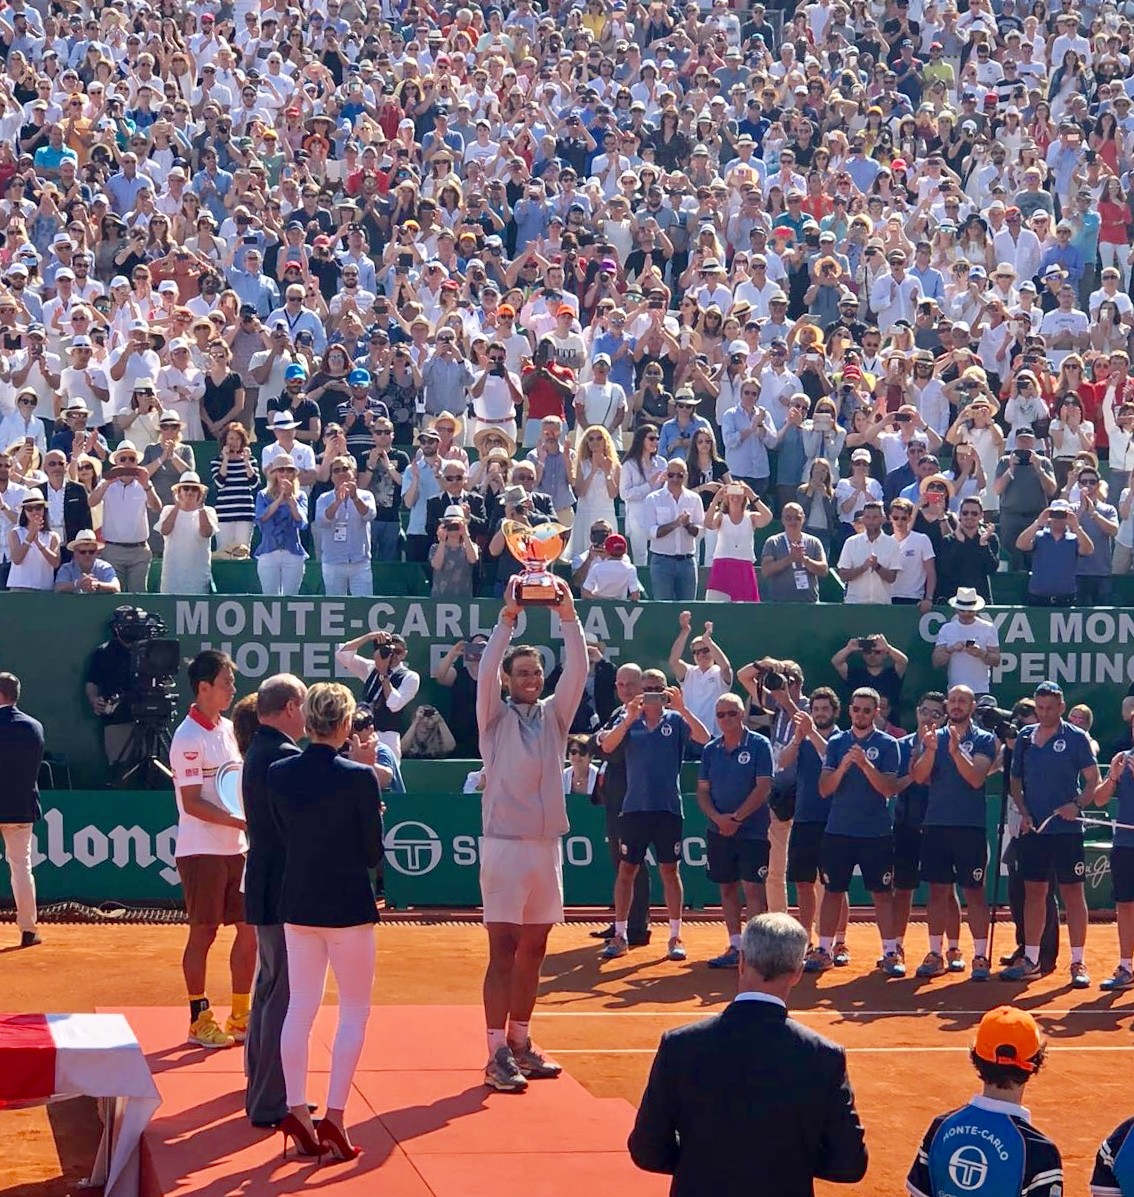 Rolex Monte-Carlo Masters Roger Federer is out, Nadal and Djokovic are in 